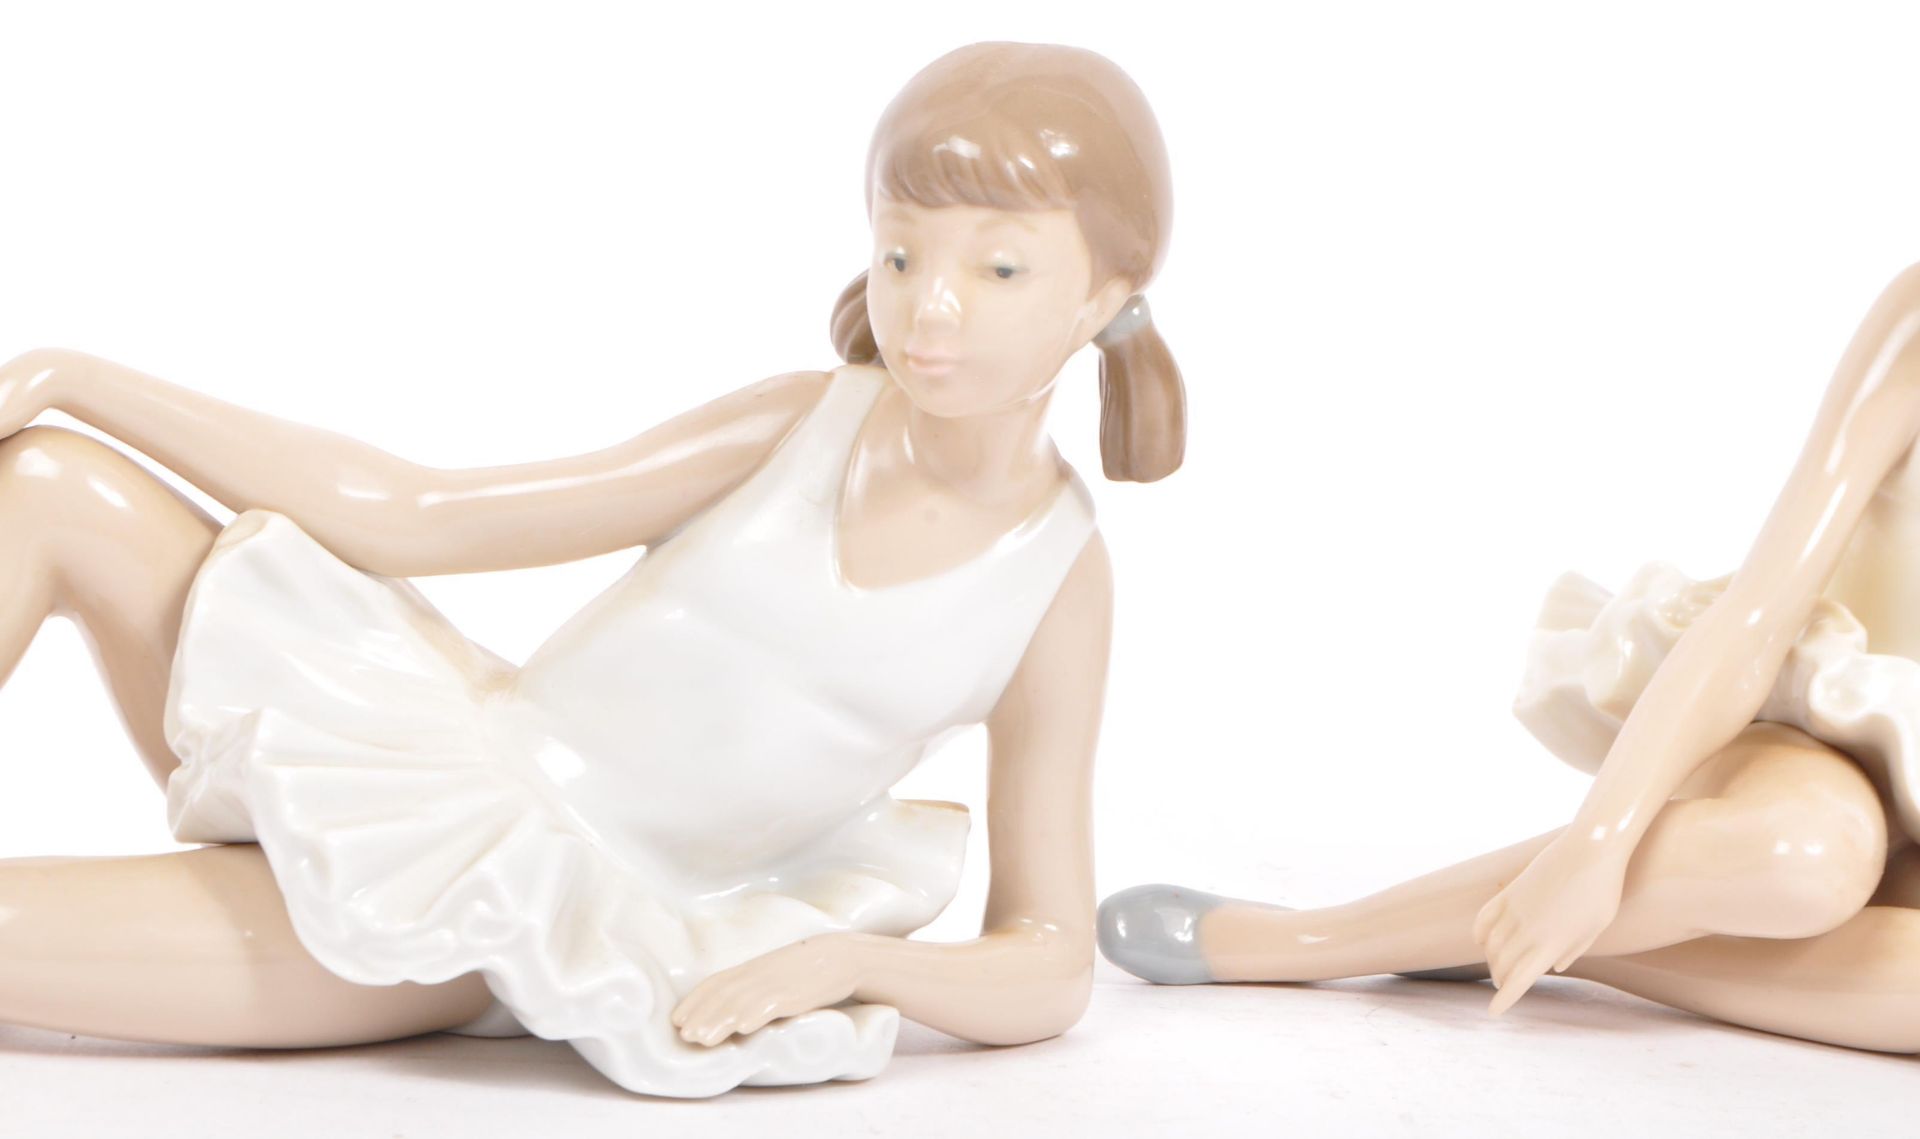 COLLECTION OF NAO PORCELAIN BALLERINA FIGURINES - Image 7 of 8